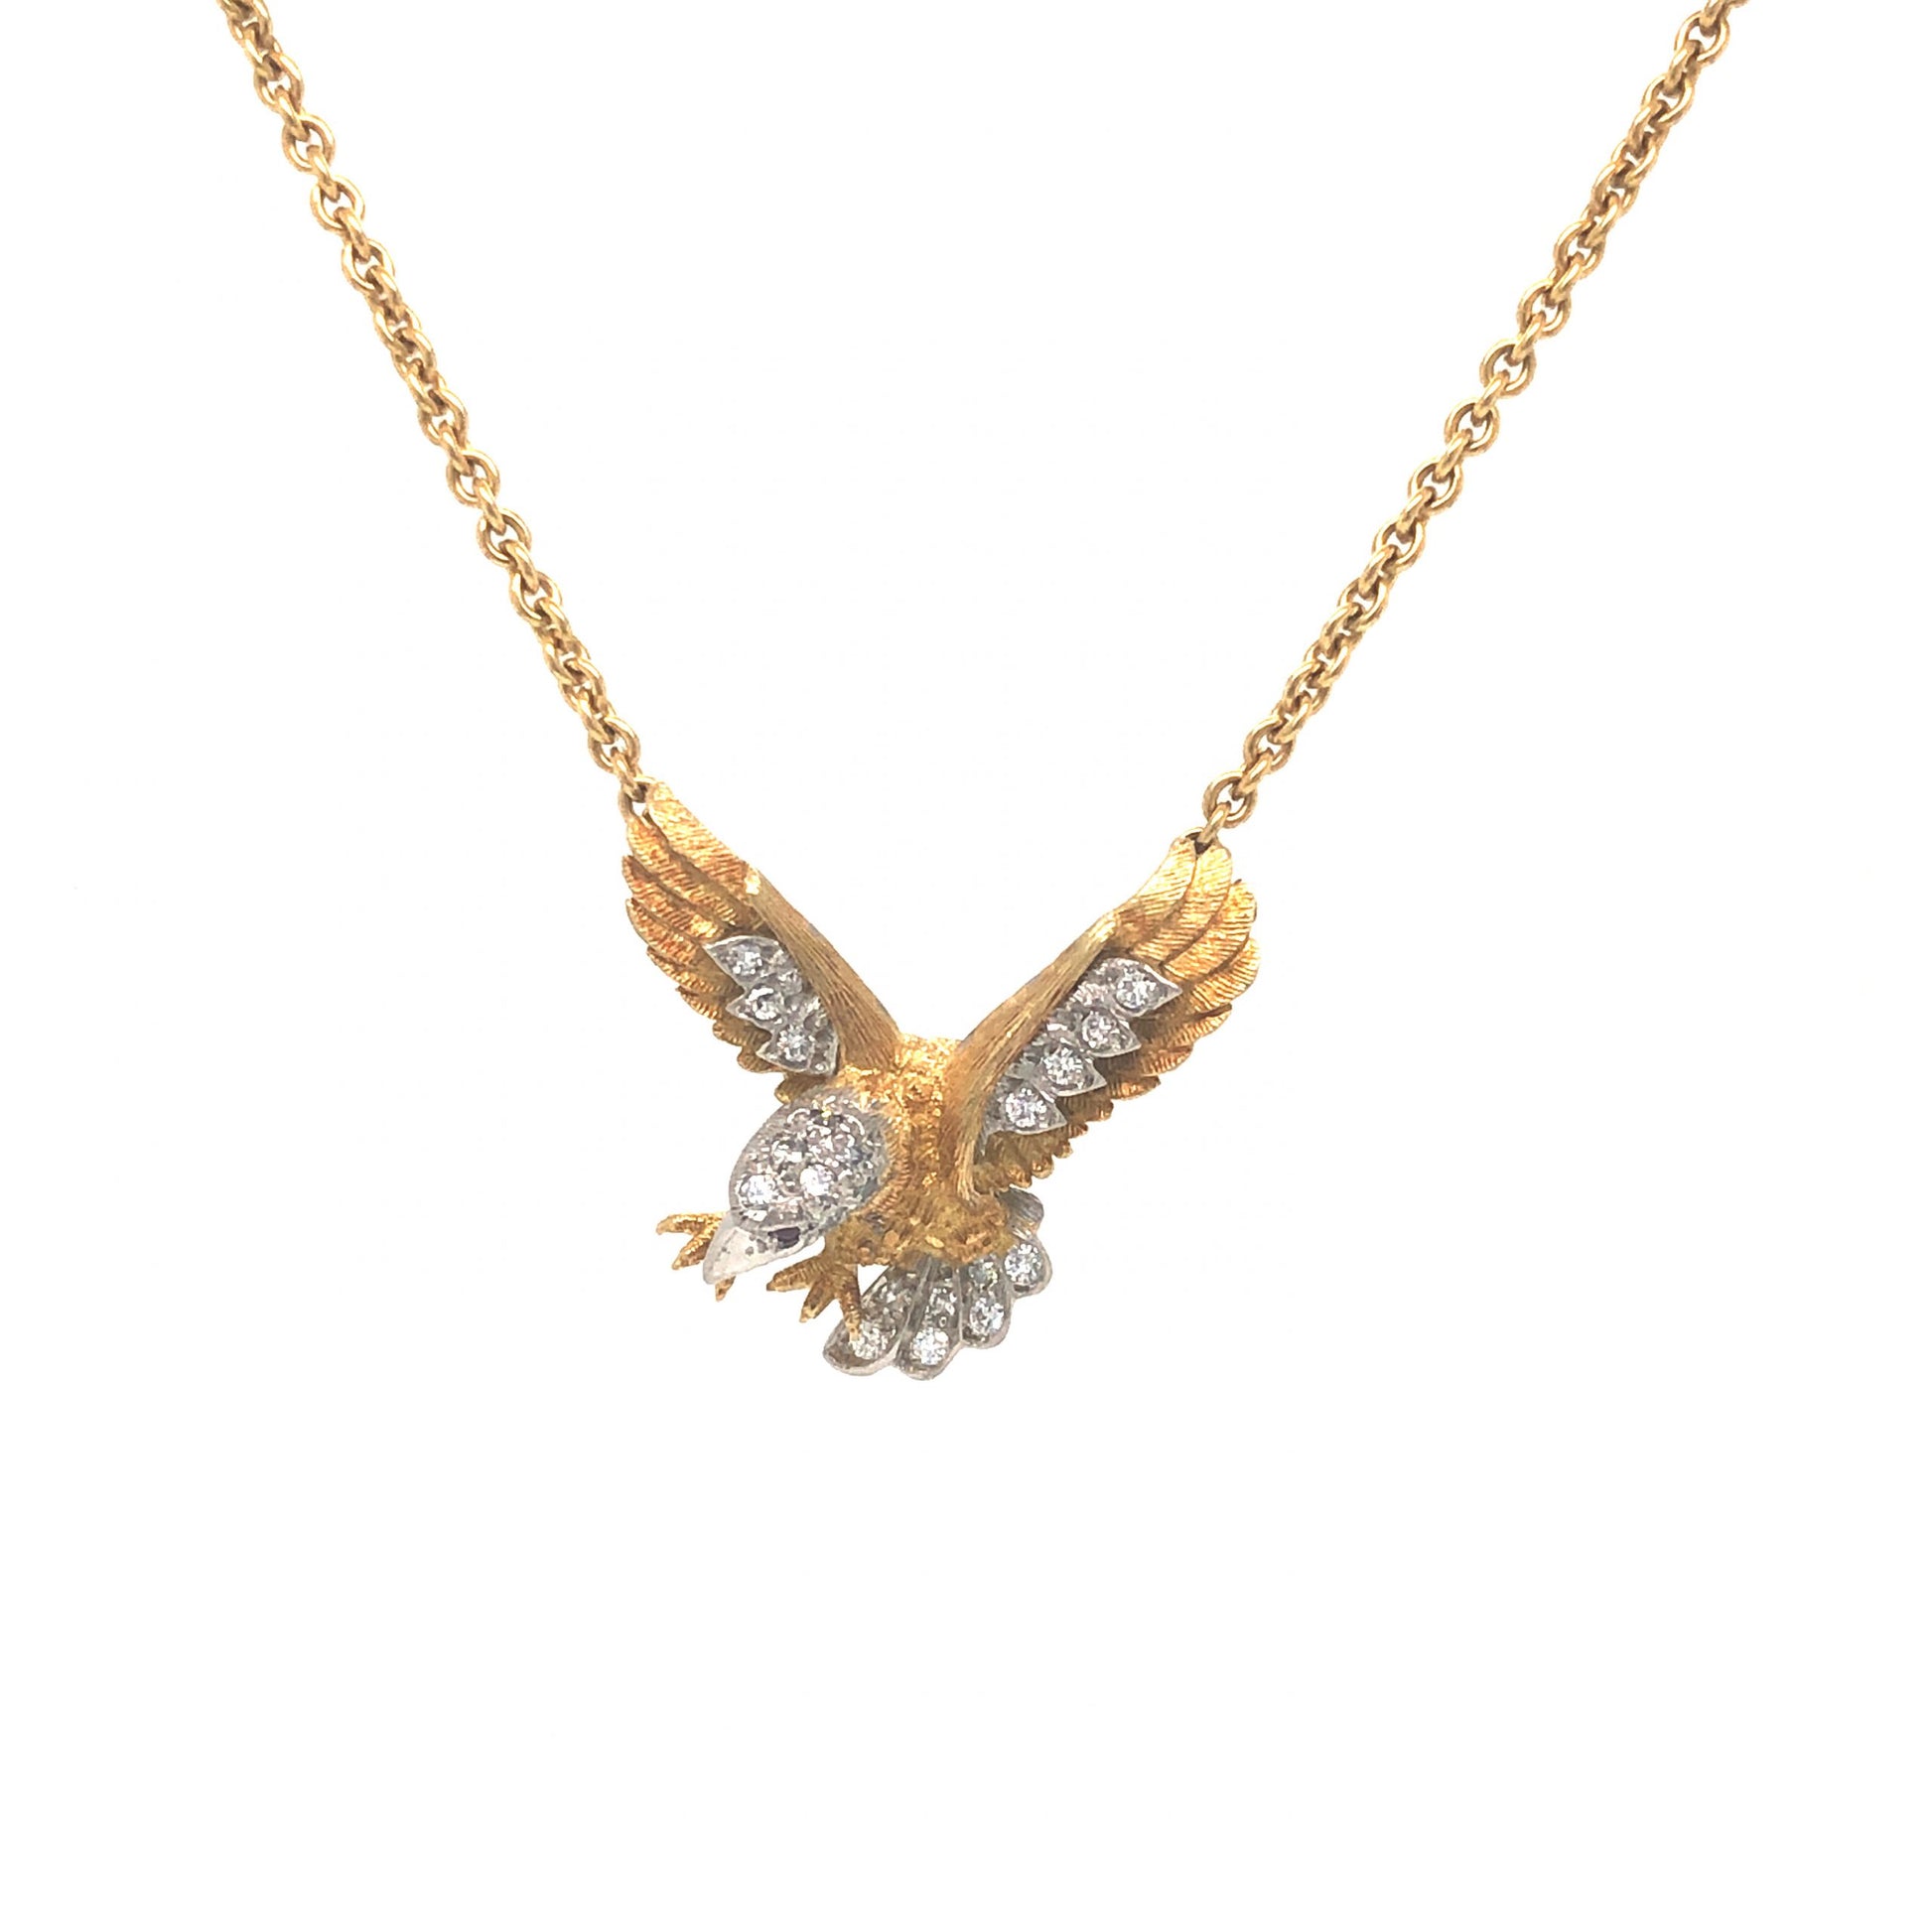 Diamond Eagle Pendant Necklace in 18k Yellow GoldComposition: Platinum Total Diamond Weight: .29ct Total Gram Weight: 10.4 g Inscription: 750, PLAT M4 18K
      